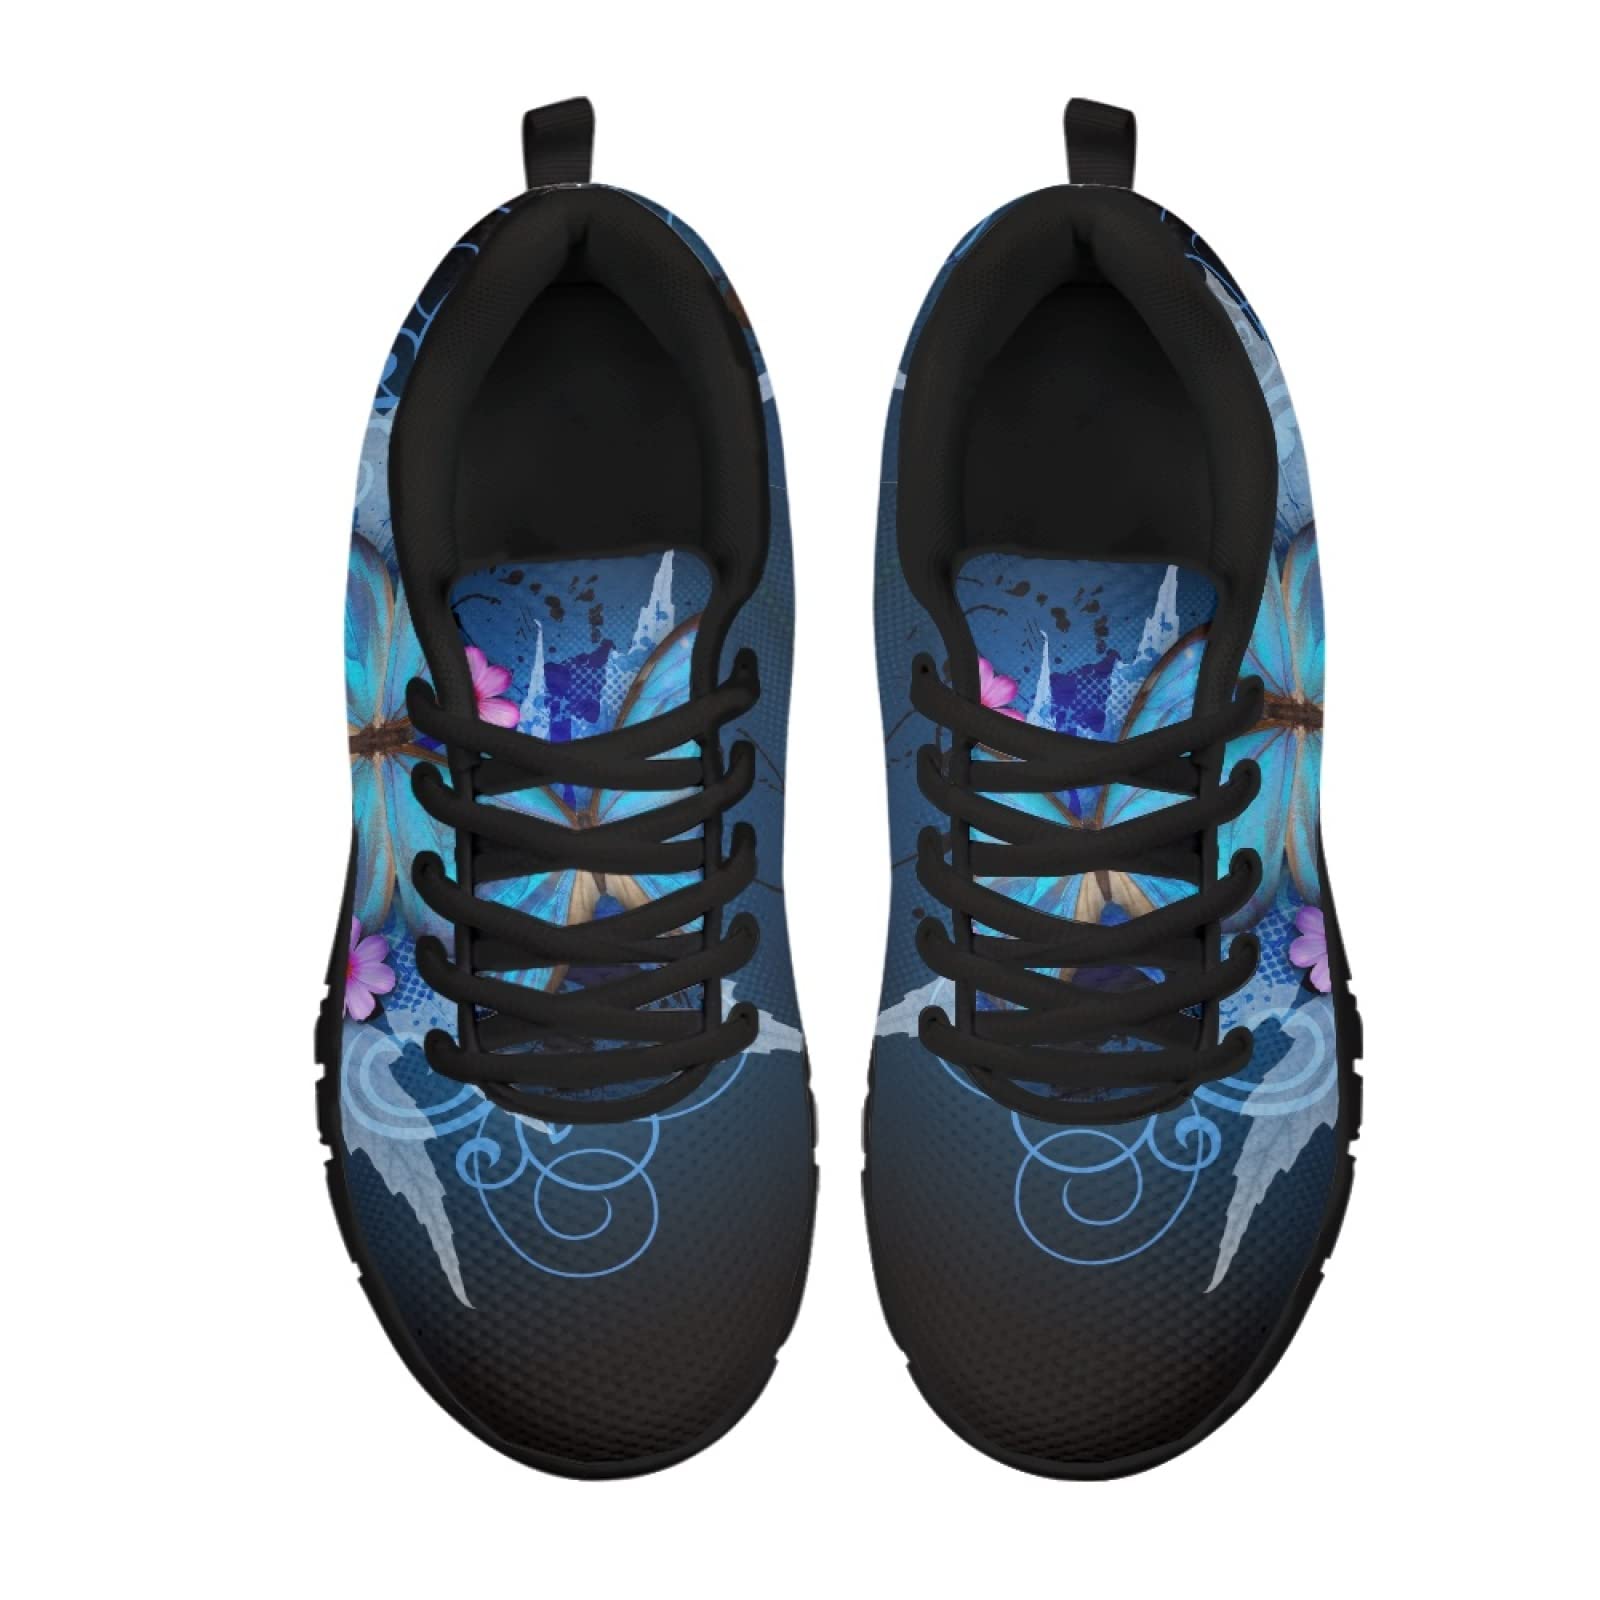 Wanyint Fashion Butterfly Print Women Running Shoes Beautiful Blue Animal with Floral Lightweight Girls' Black Sole Sneakers Hiking Camping Cute Wildlife Mesh Air Training Athletic Shoes